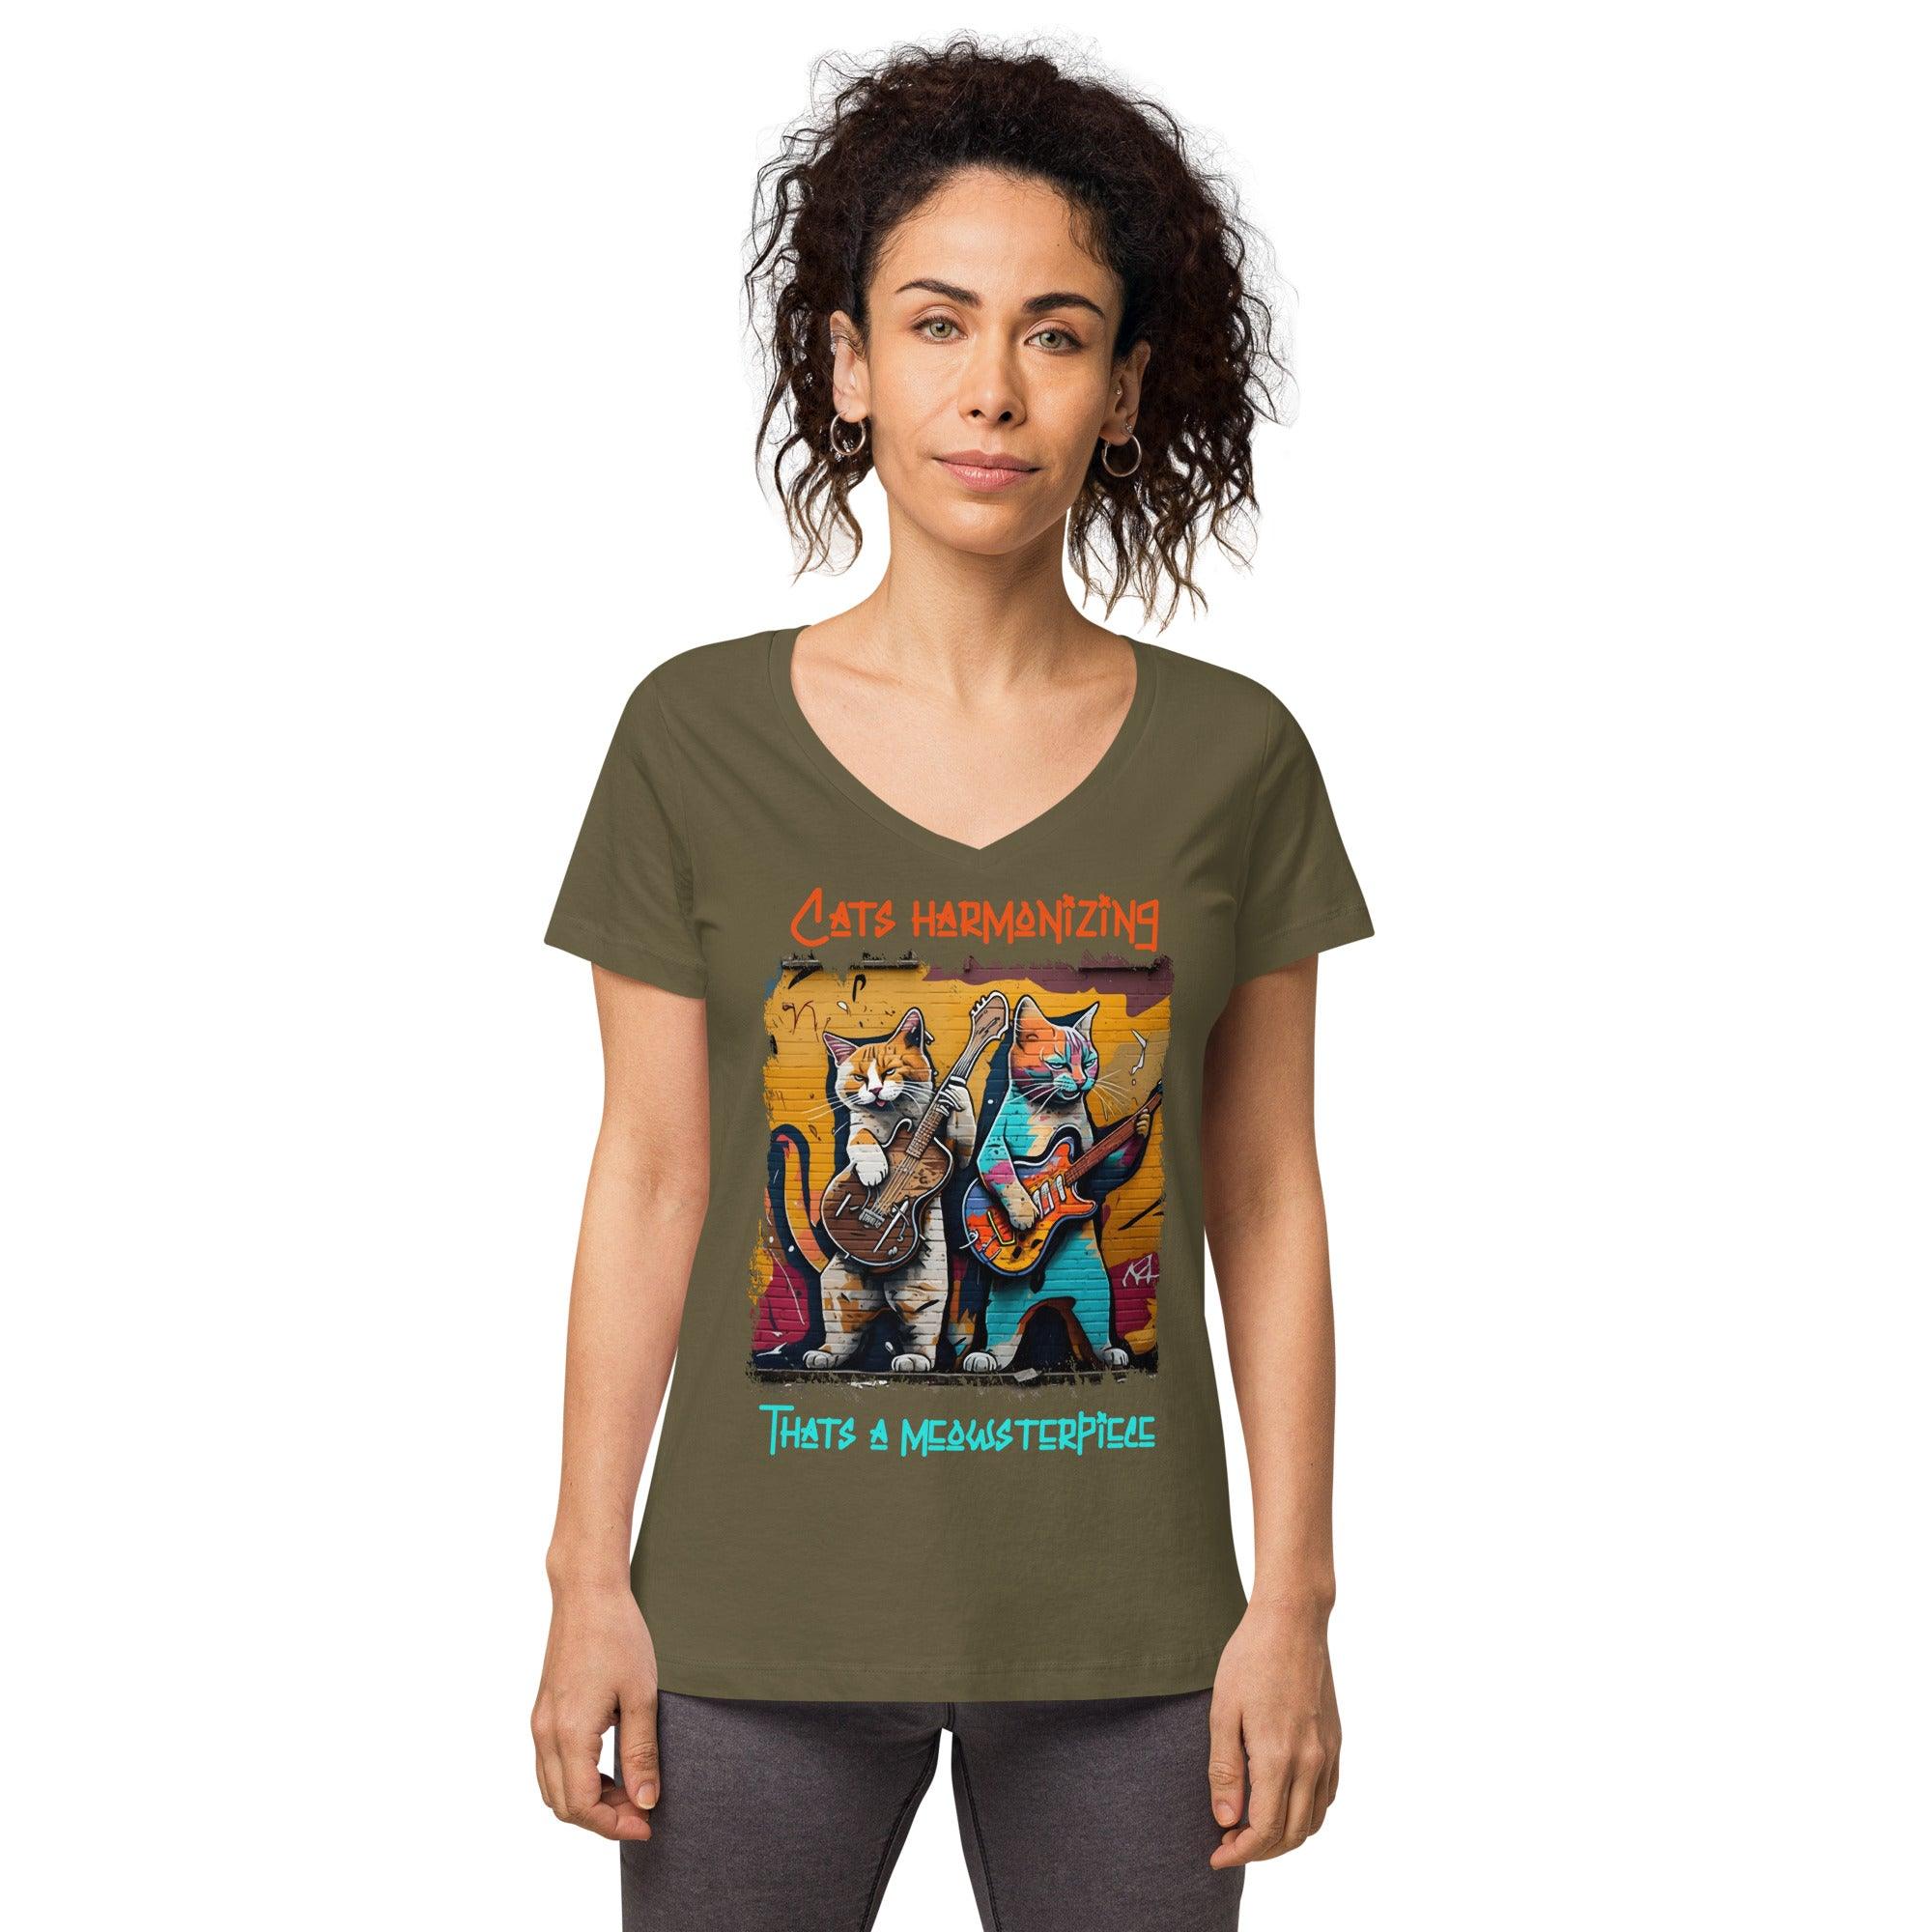 Thats A Meowsterpiece Women’s fitted v-neck t-shirt - Beyond T-shirts